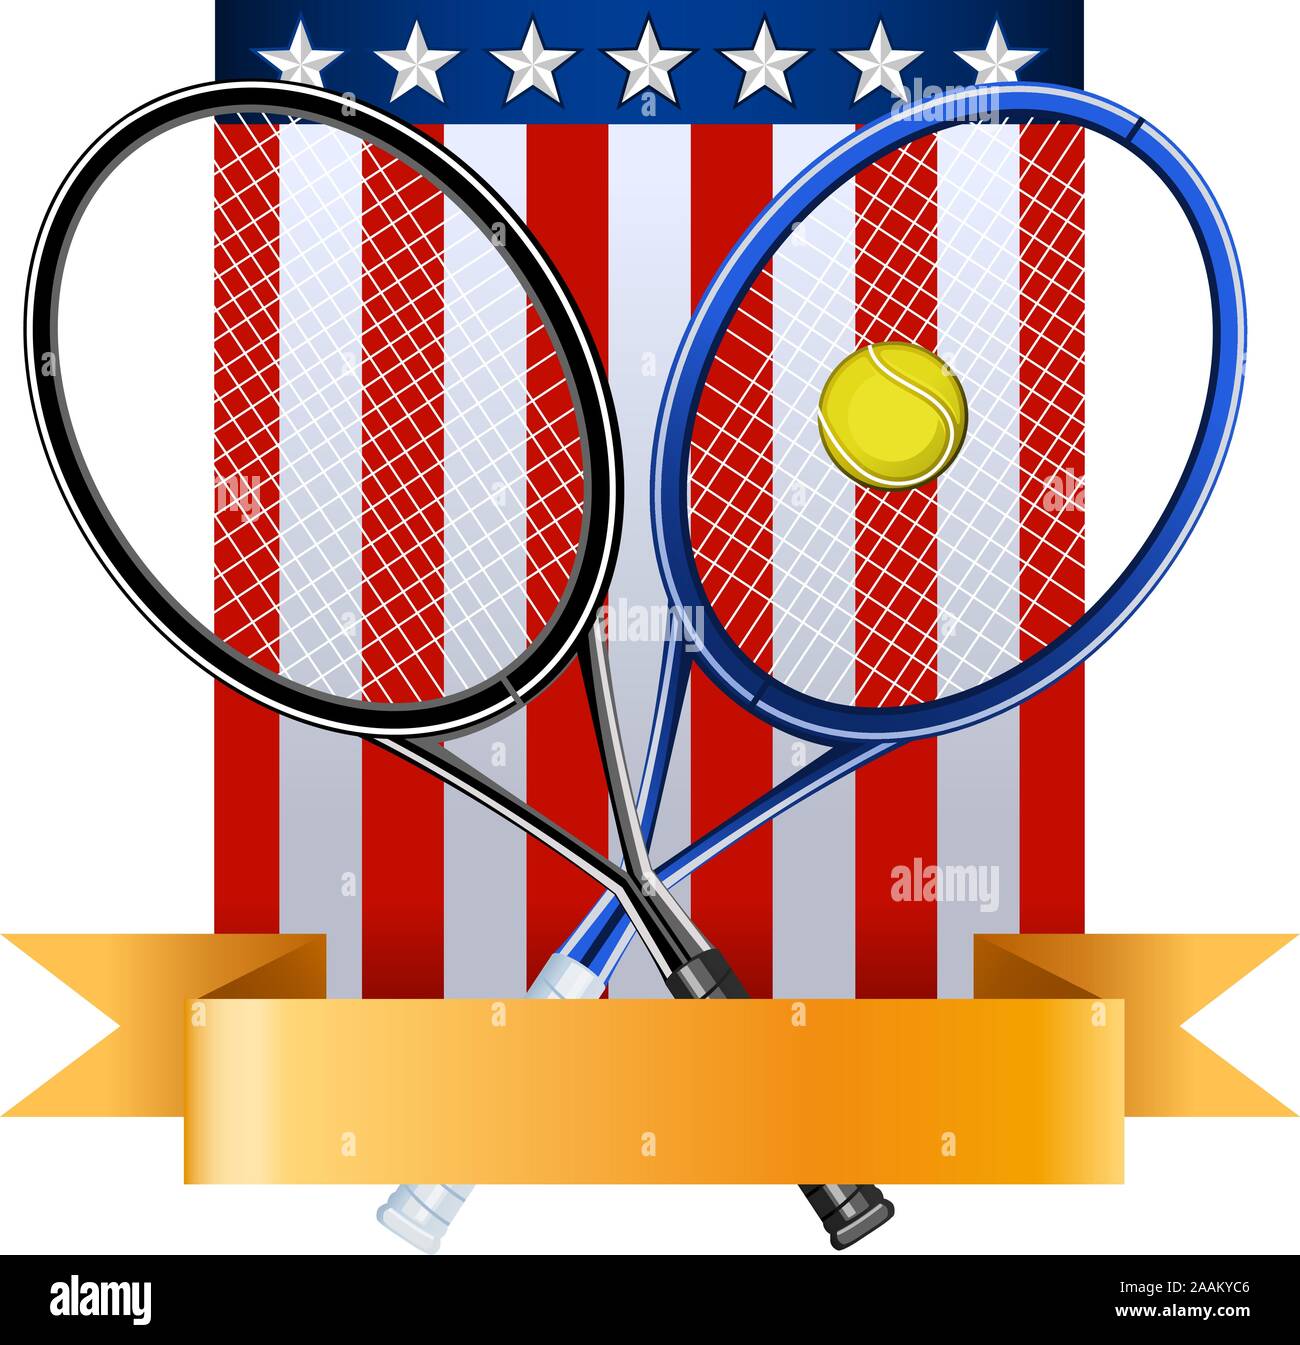 American tennis emblem with rackets ball and EEUU flag vector illustration, with seven stars and banner. Stock Vector